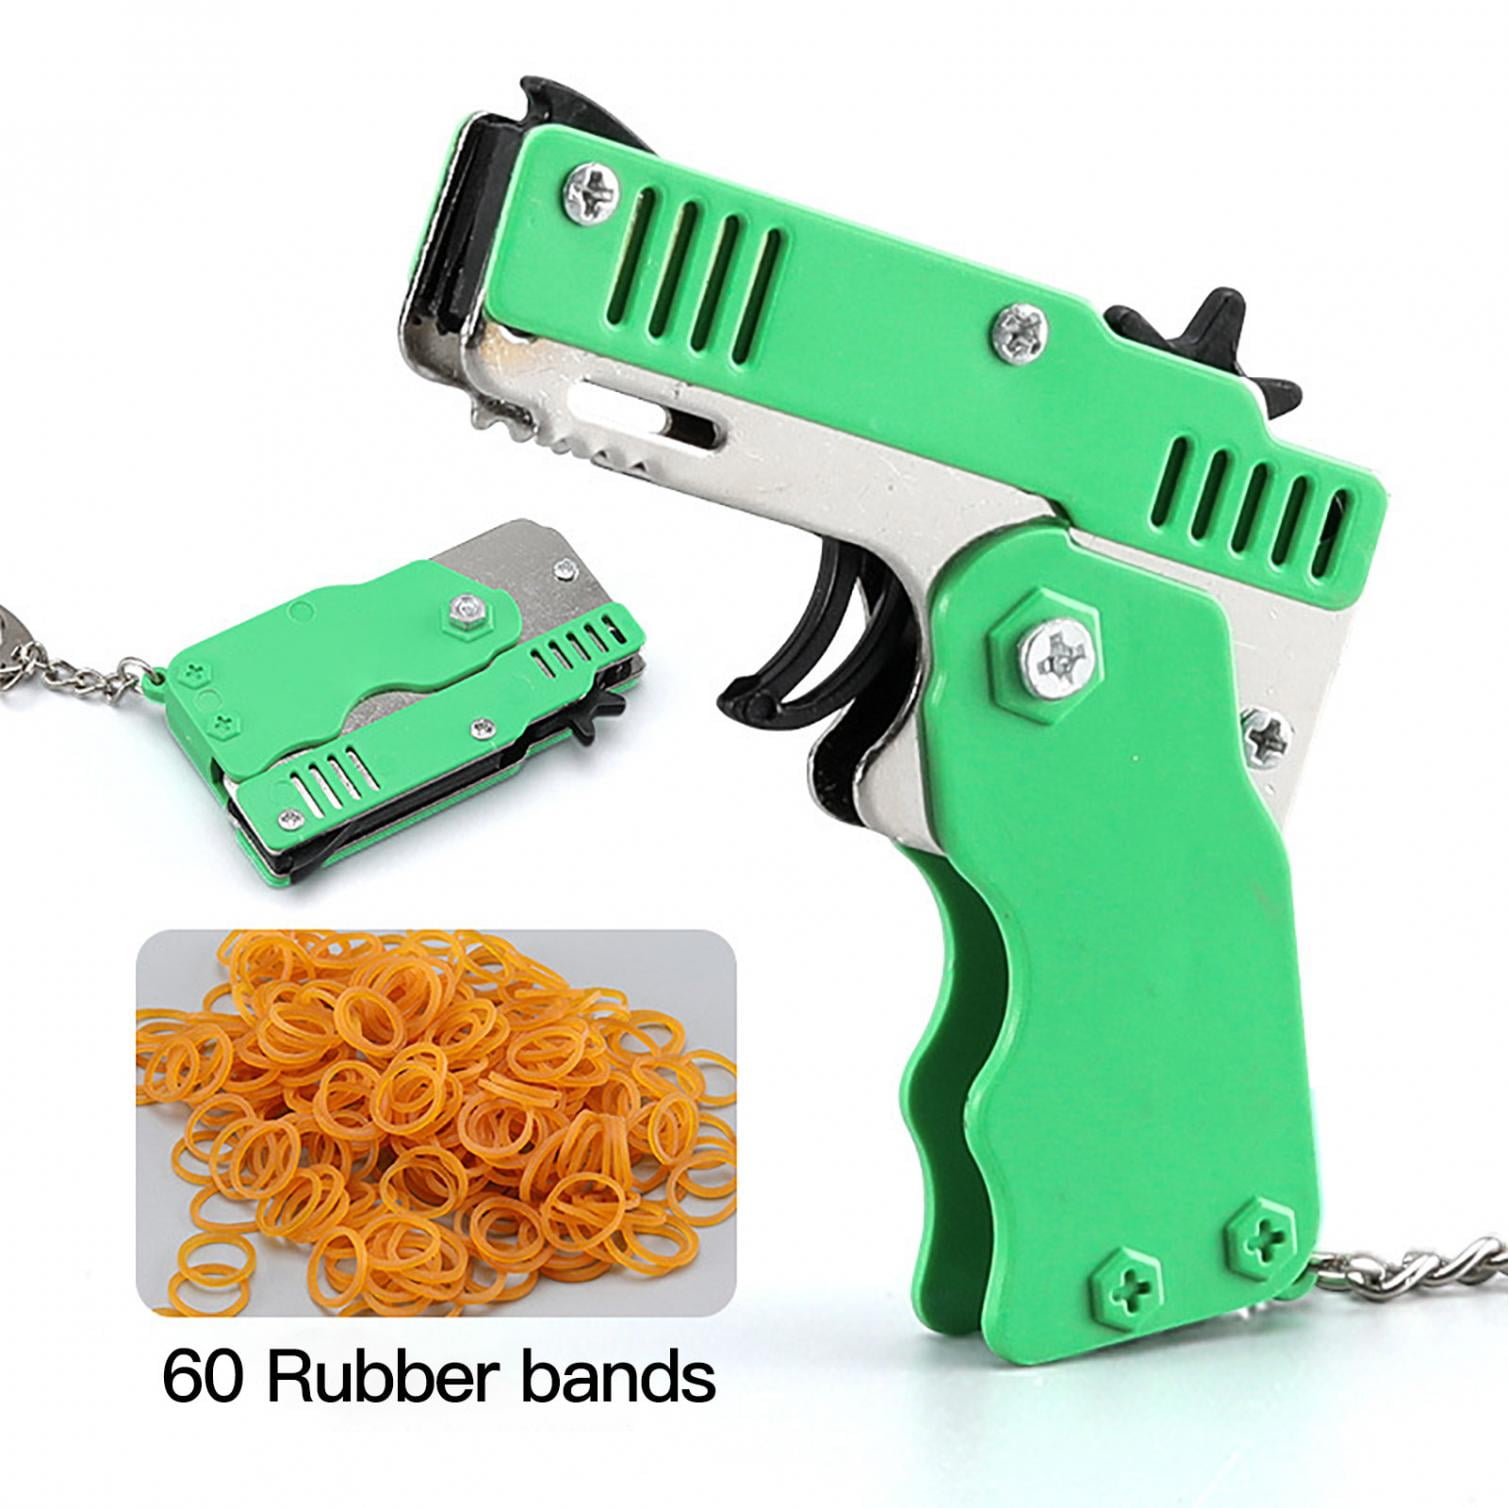 Wuztai Rubber Bands Toy Metal Foldable Shooting Toys Playing Rubber Band Kids Gift for Boys Girls Black